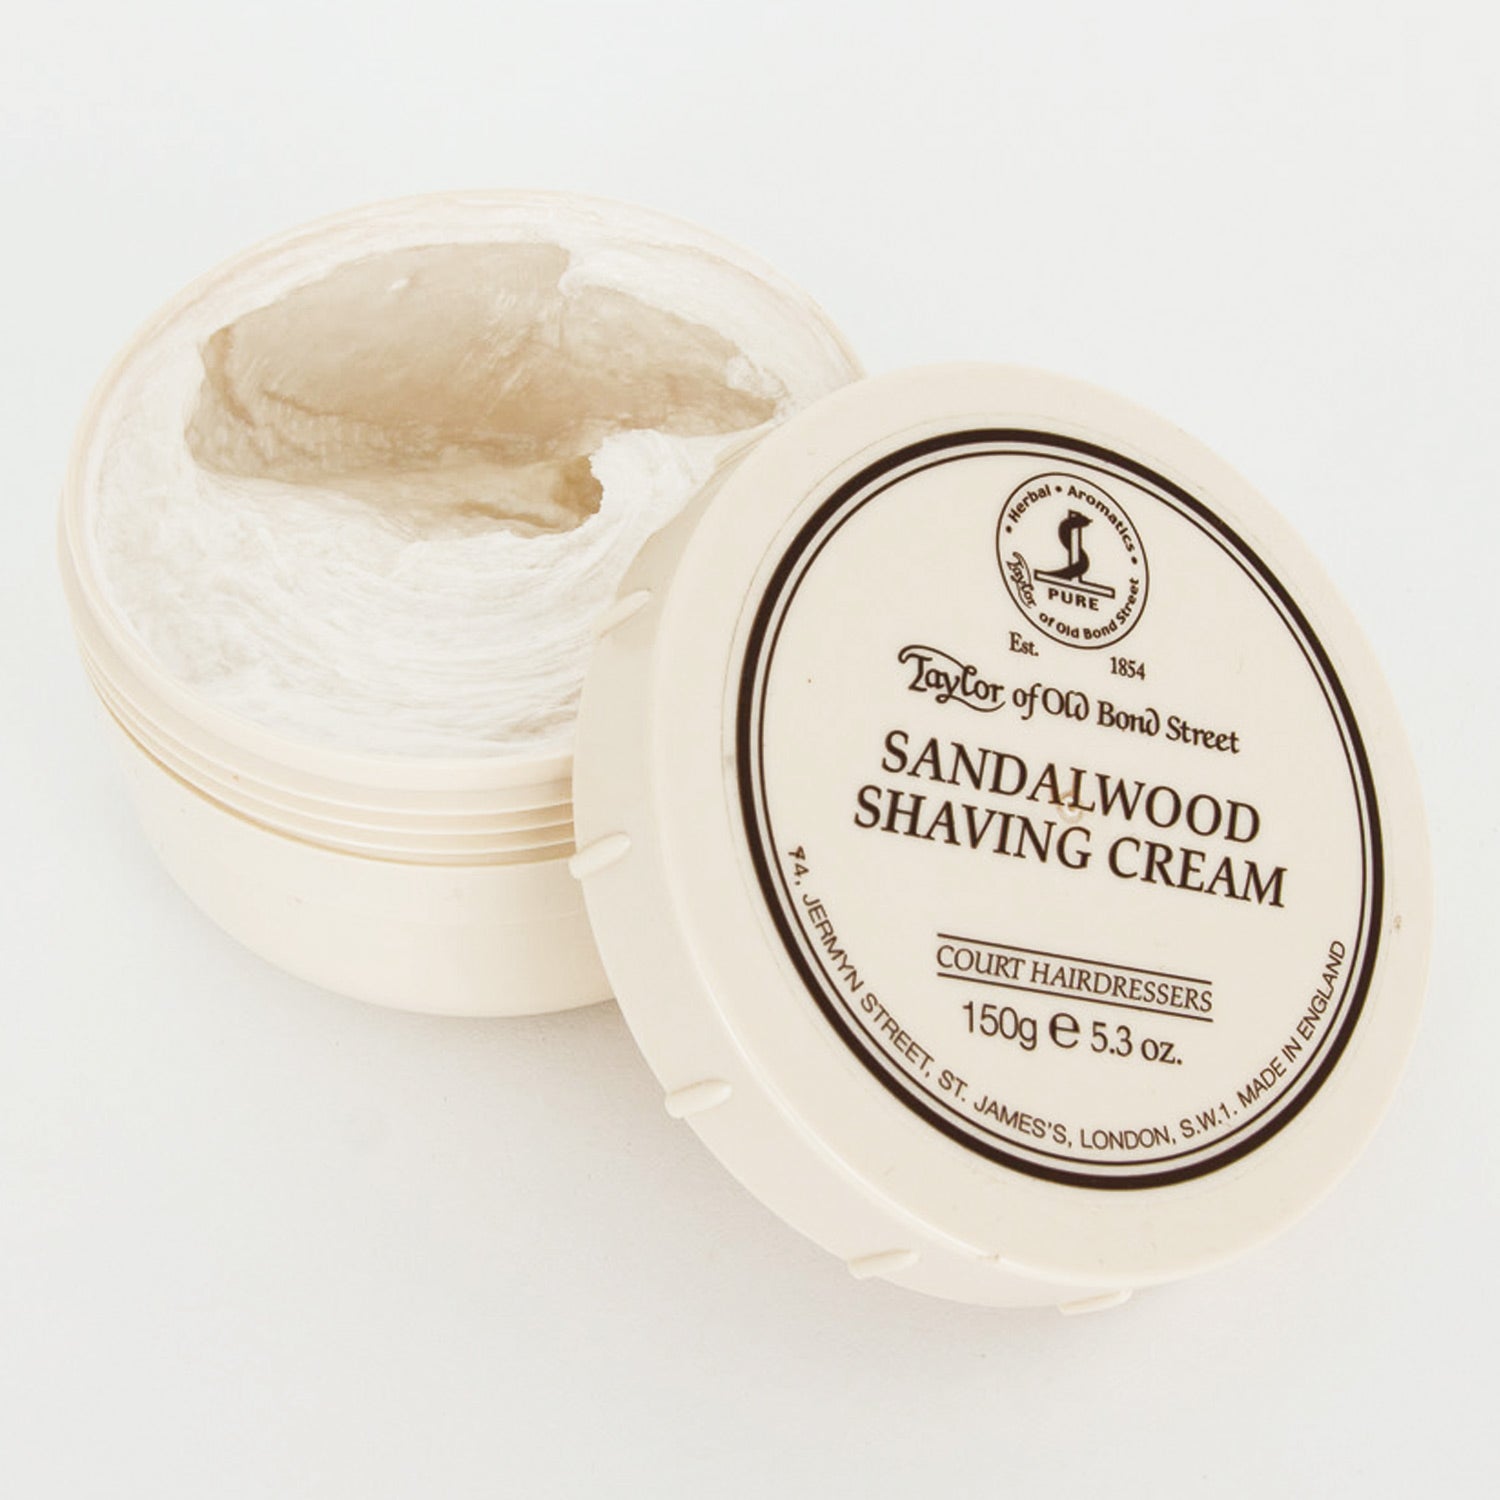 A container of Sandalwood Shaving Cream Bowl by Taylor of Old Bond Street on a white surface.